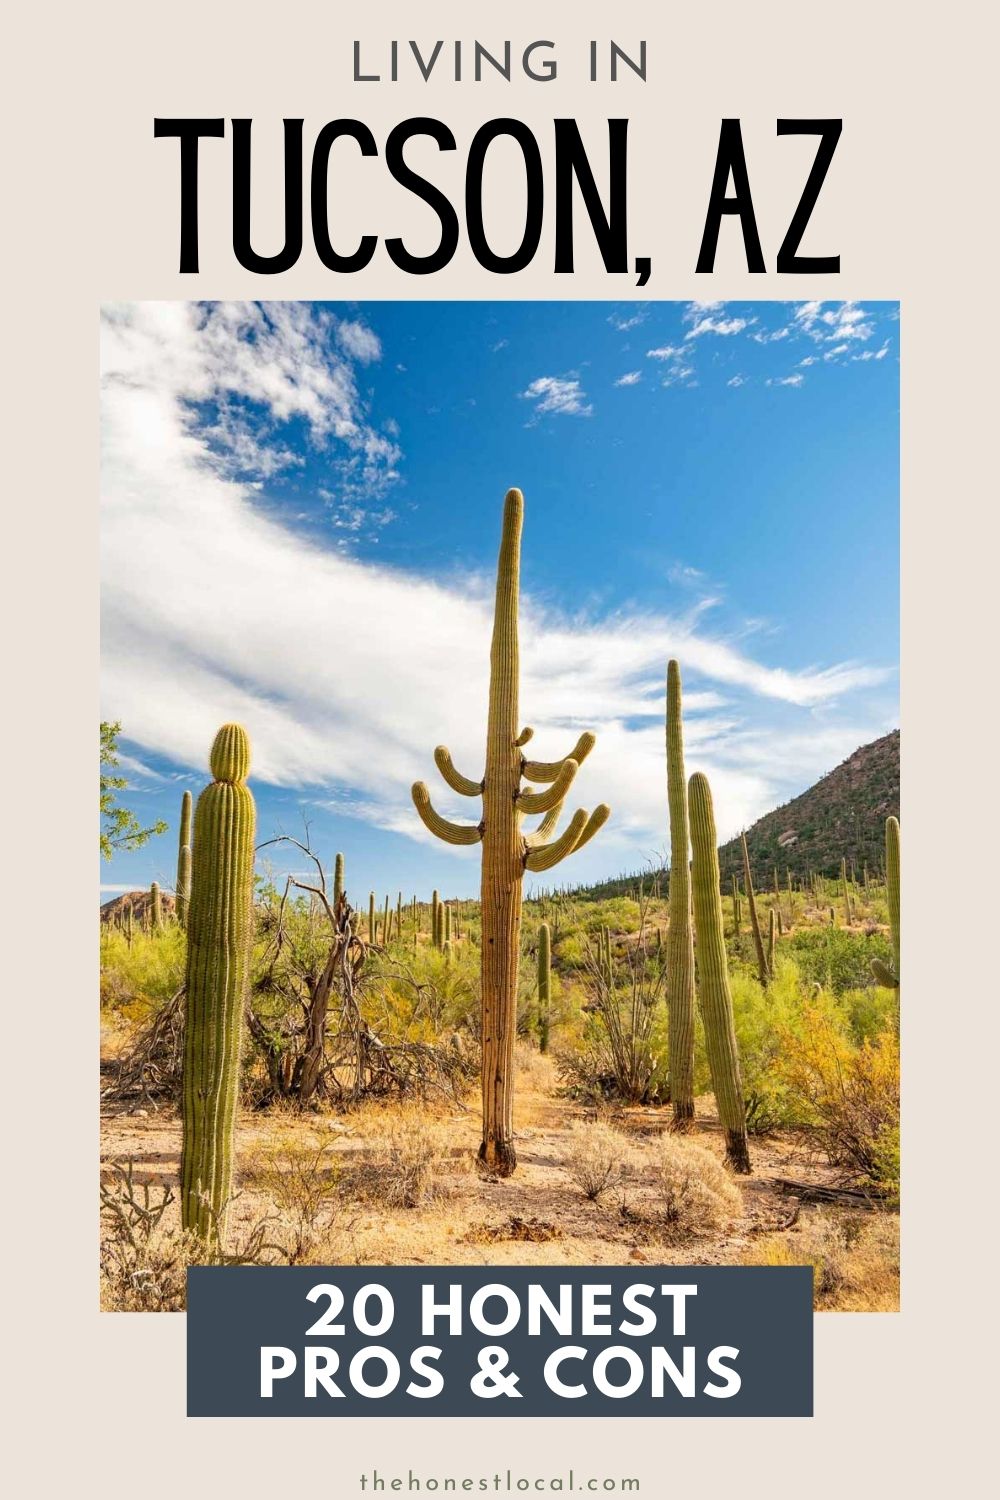 Pros and cons of living in Tucson